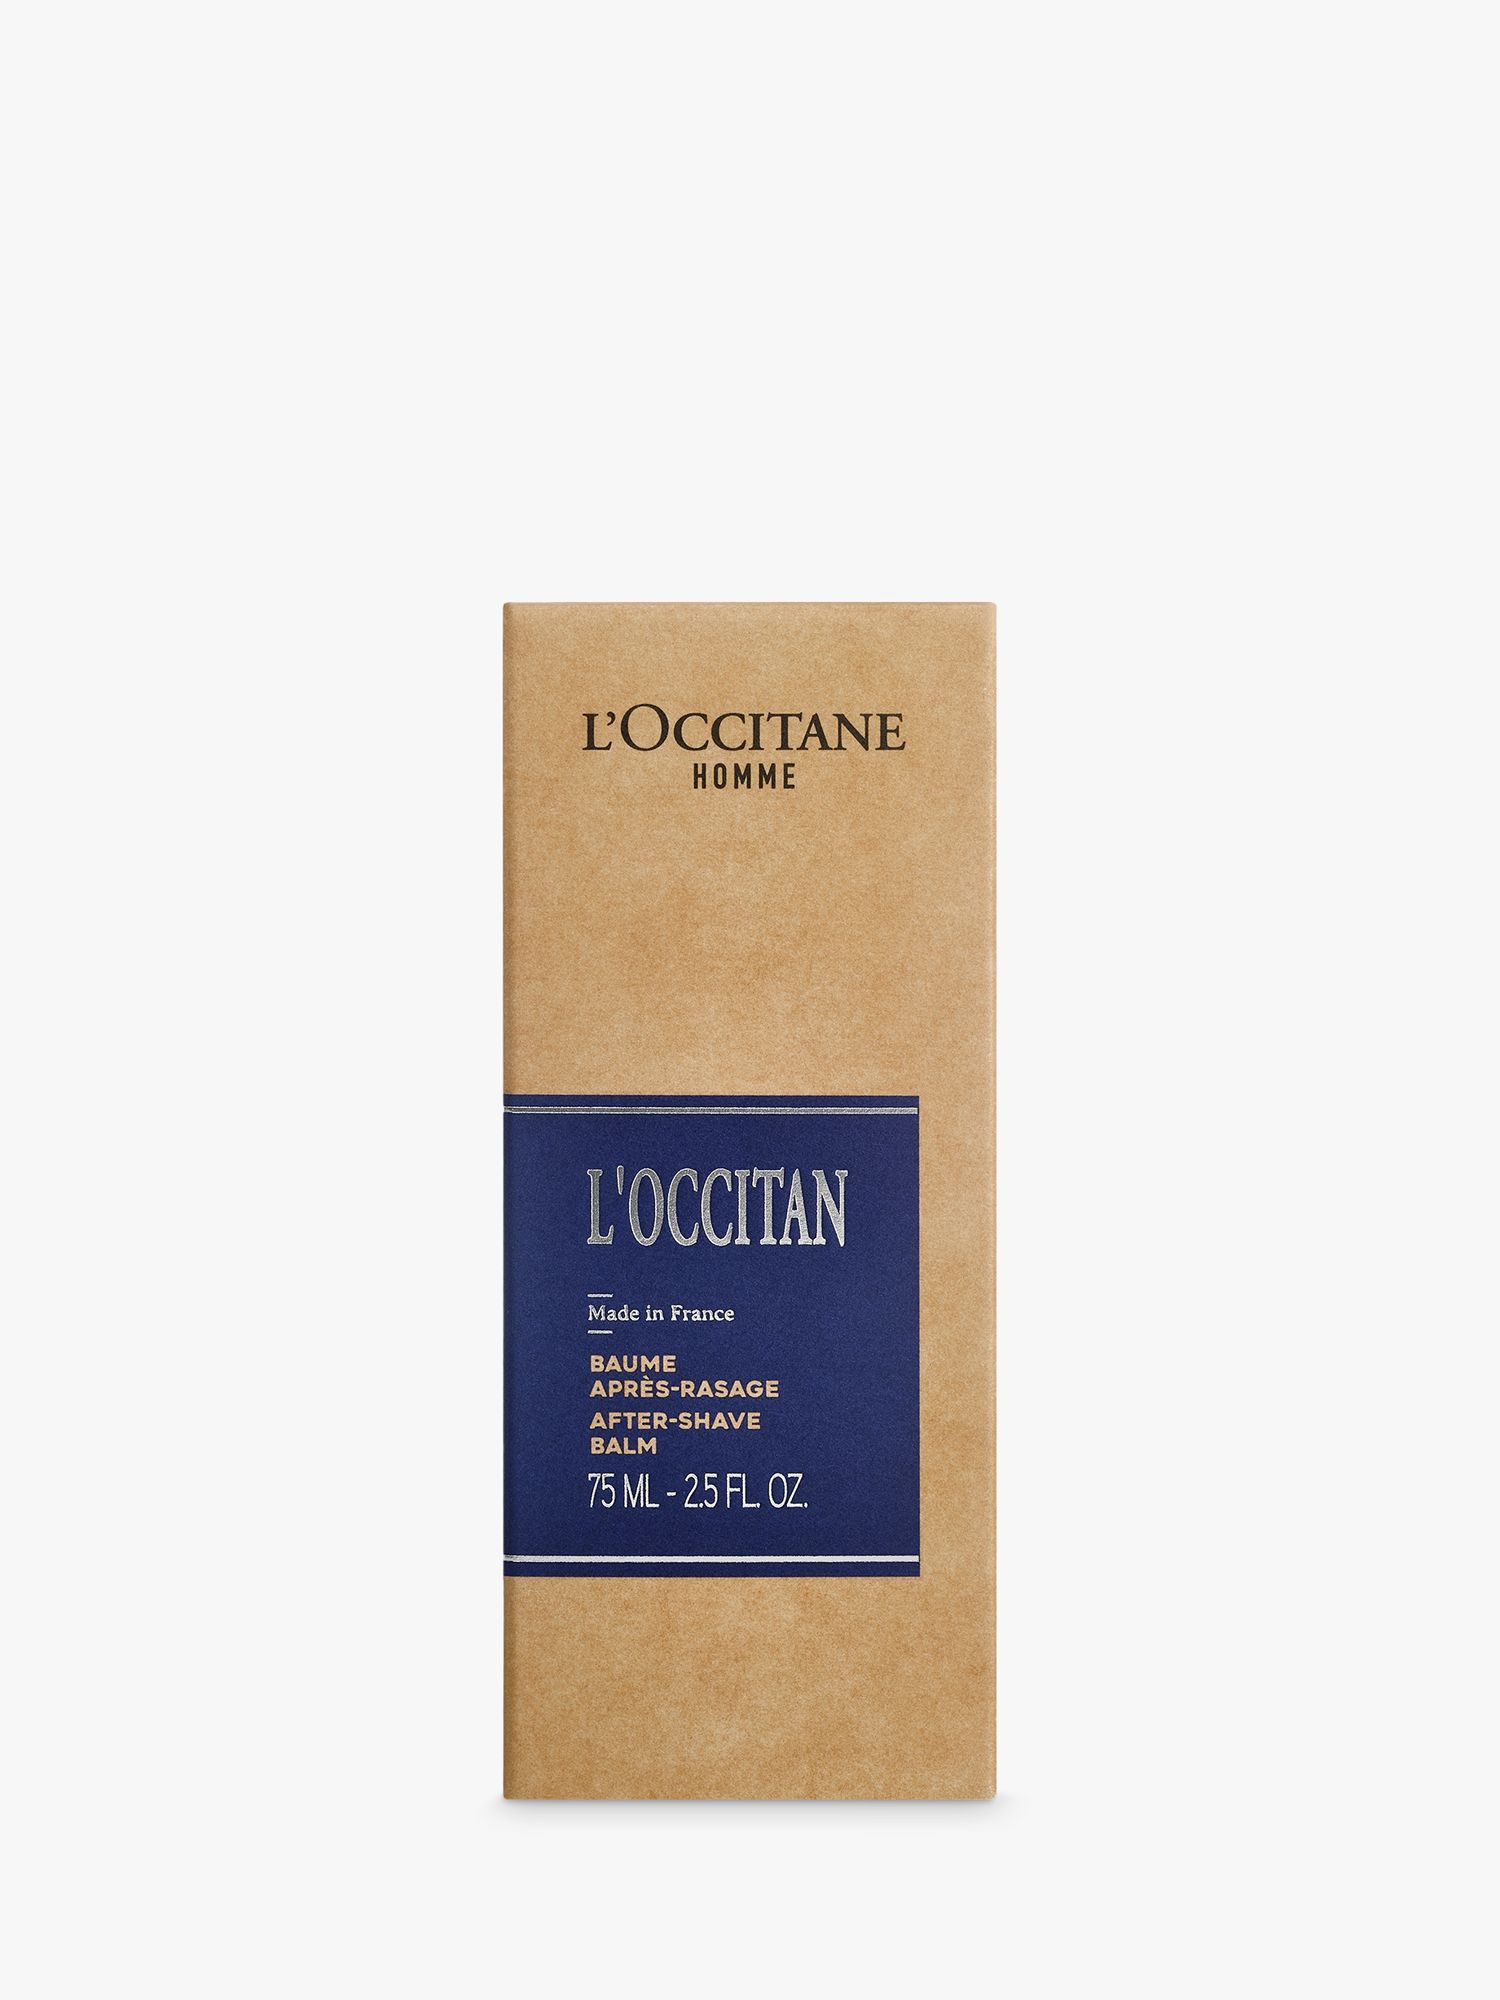 L'OCCITANE Homme After Shave Balm, 75ml